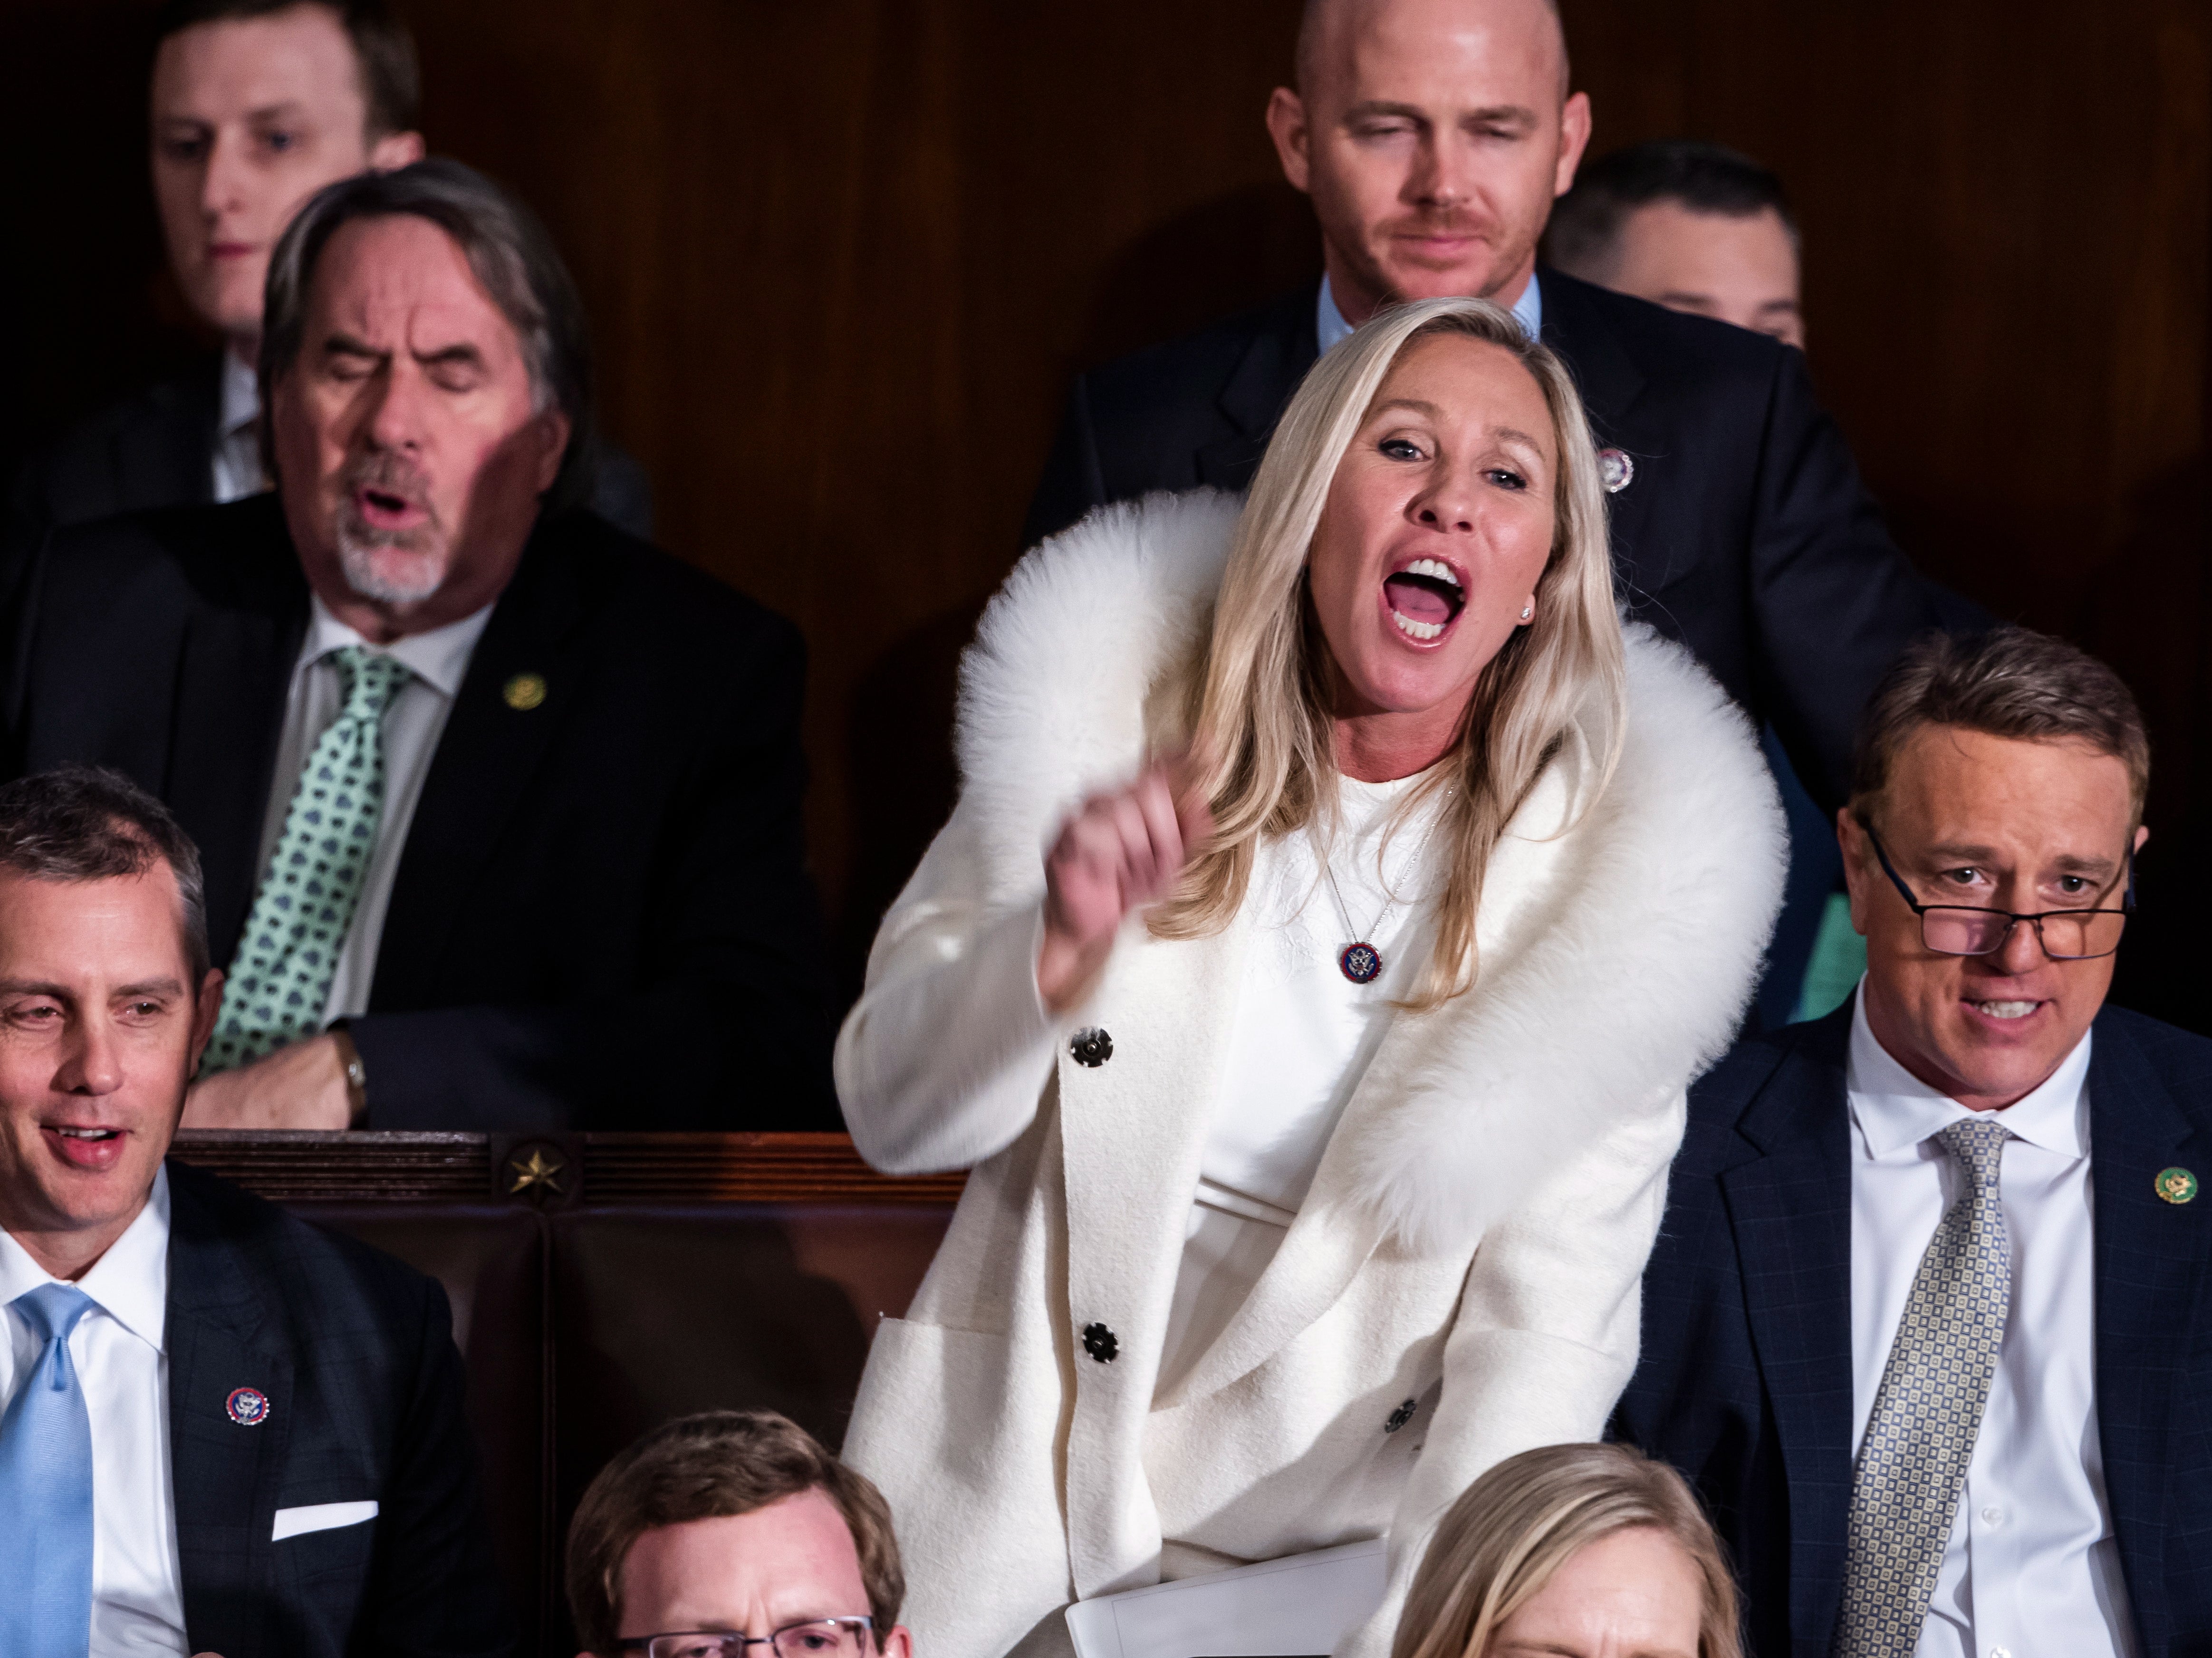 Georgia Republican Marjorie Taylor Greene heckles during Joe Biden’s State of the Union